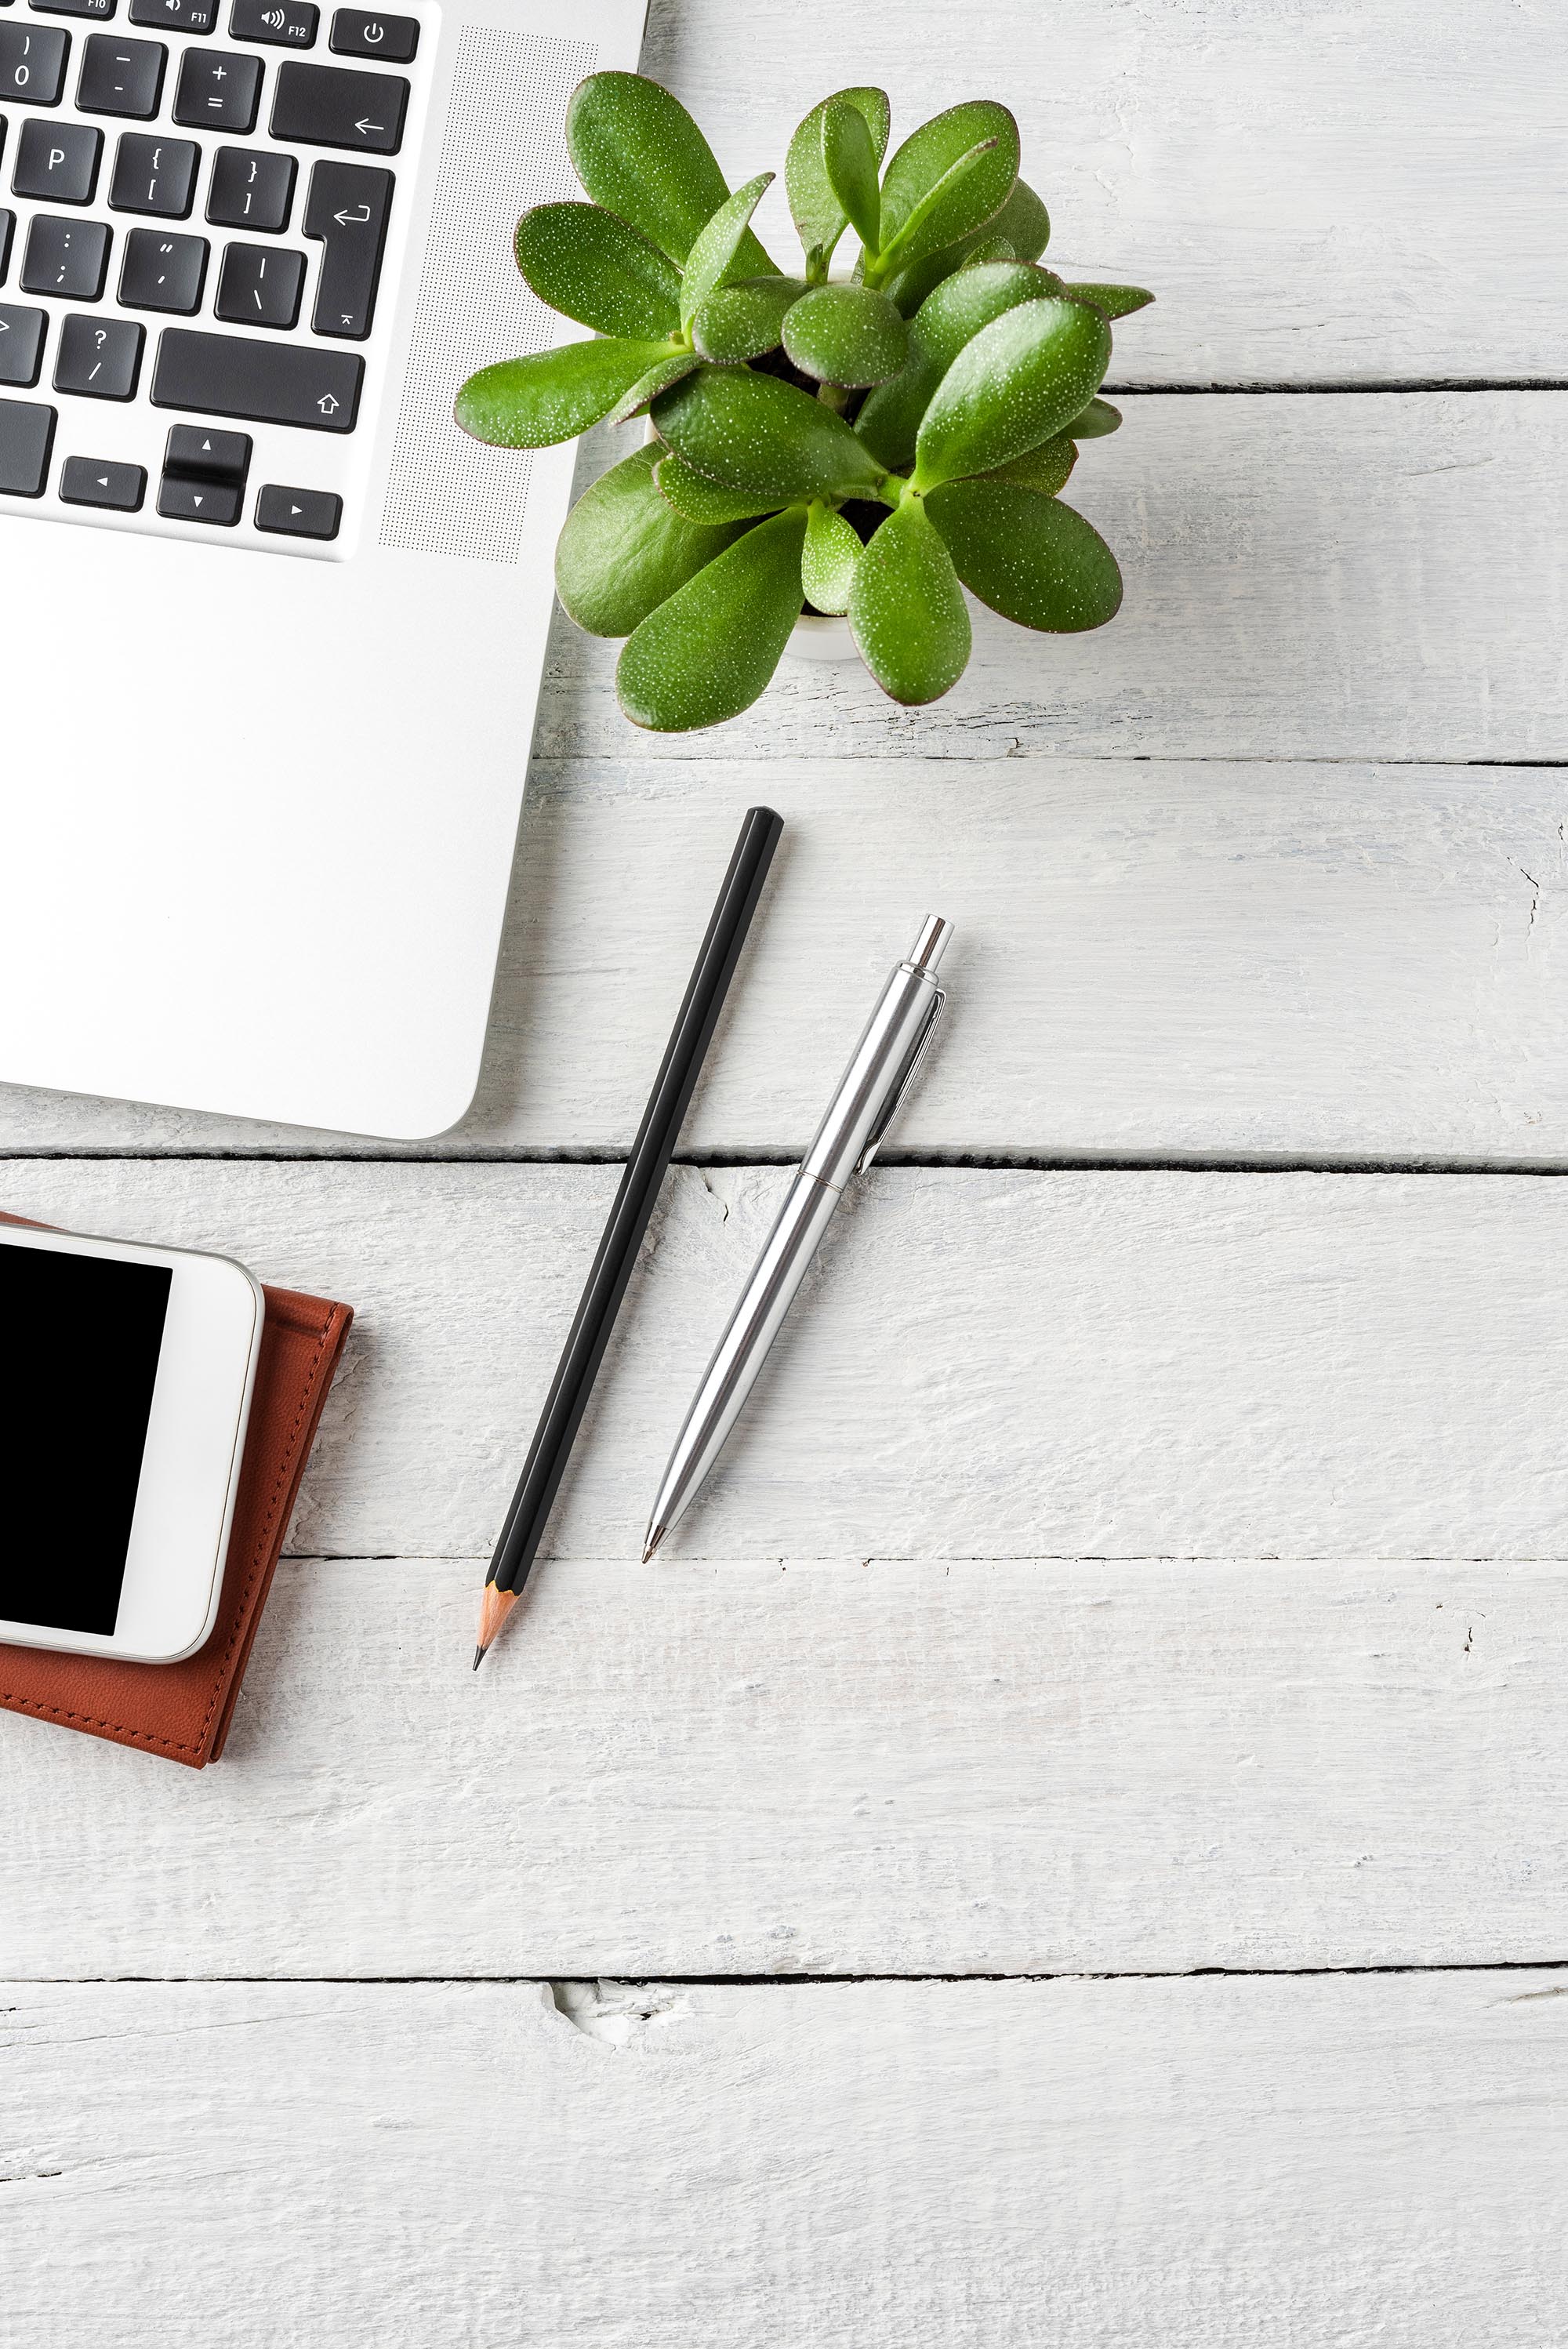 Laptop, mobile phone, notebook, pen and small flower on white wooden desktop